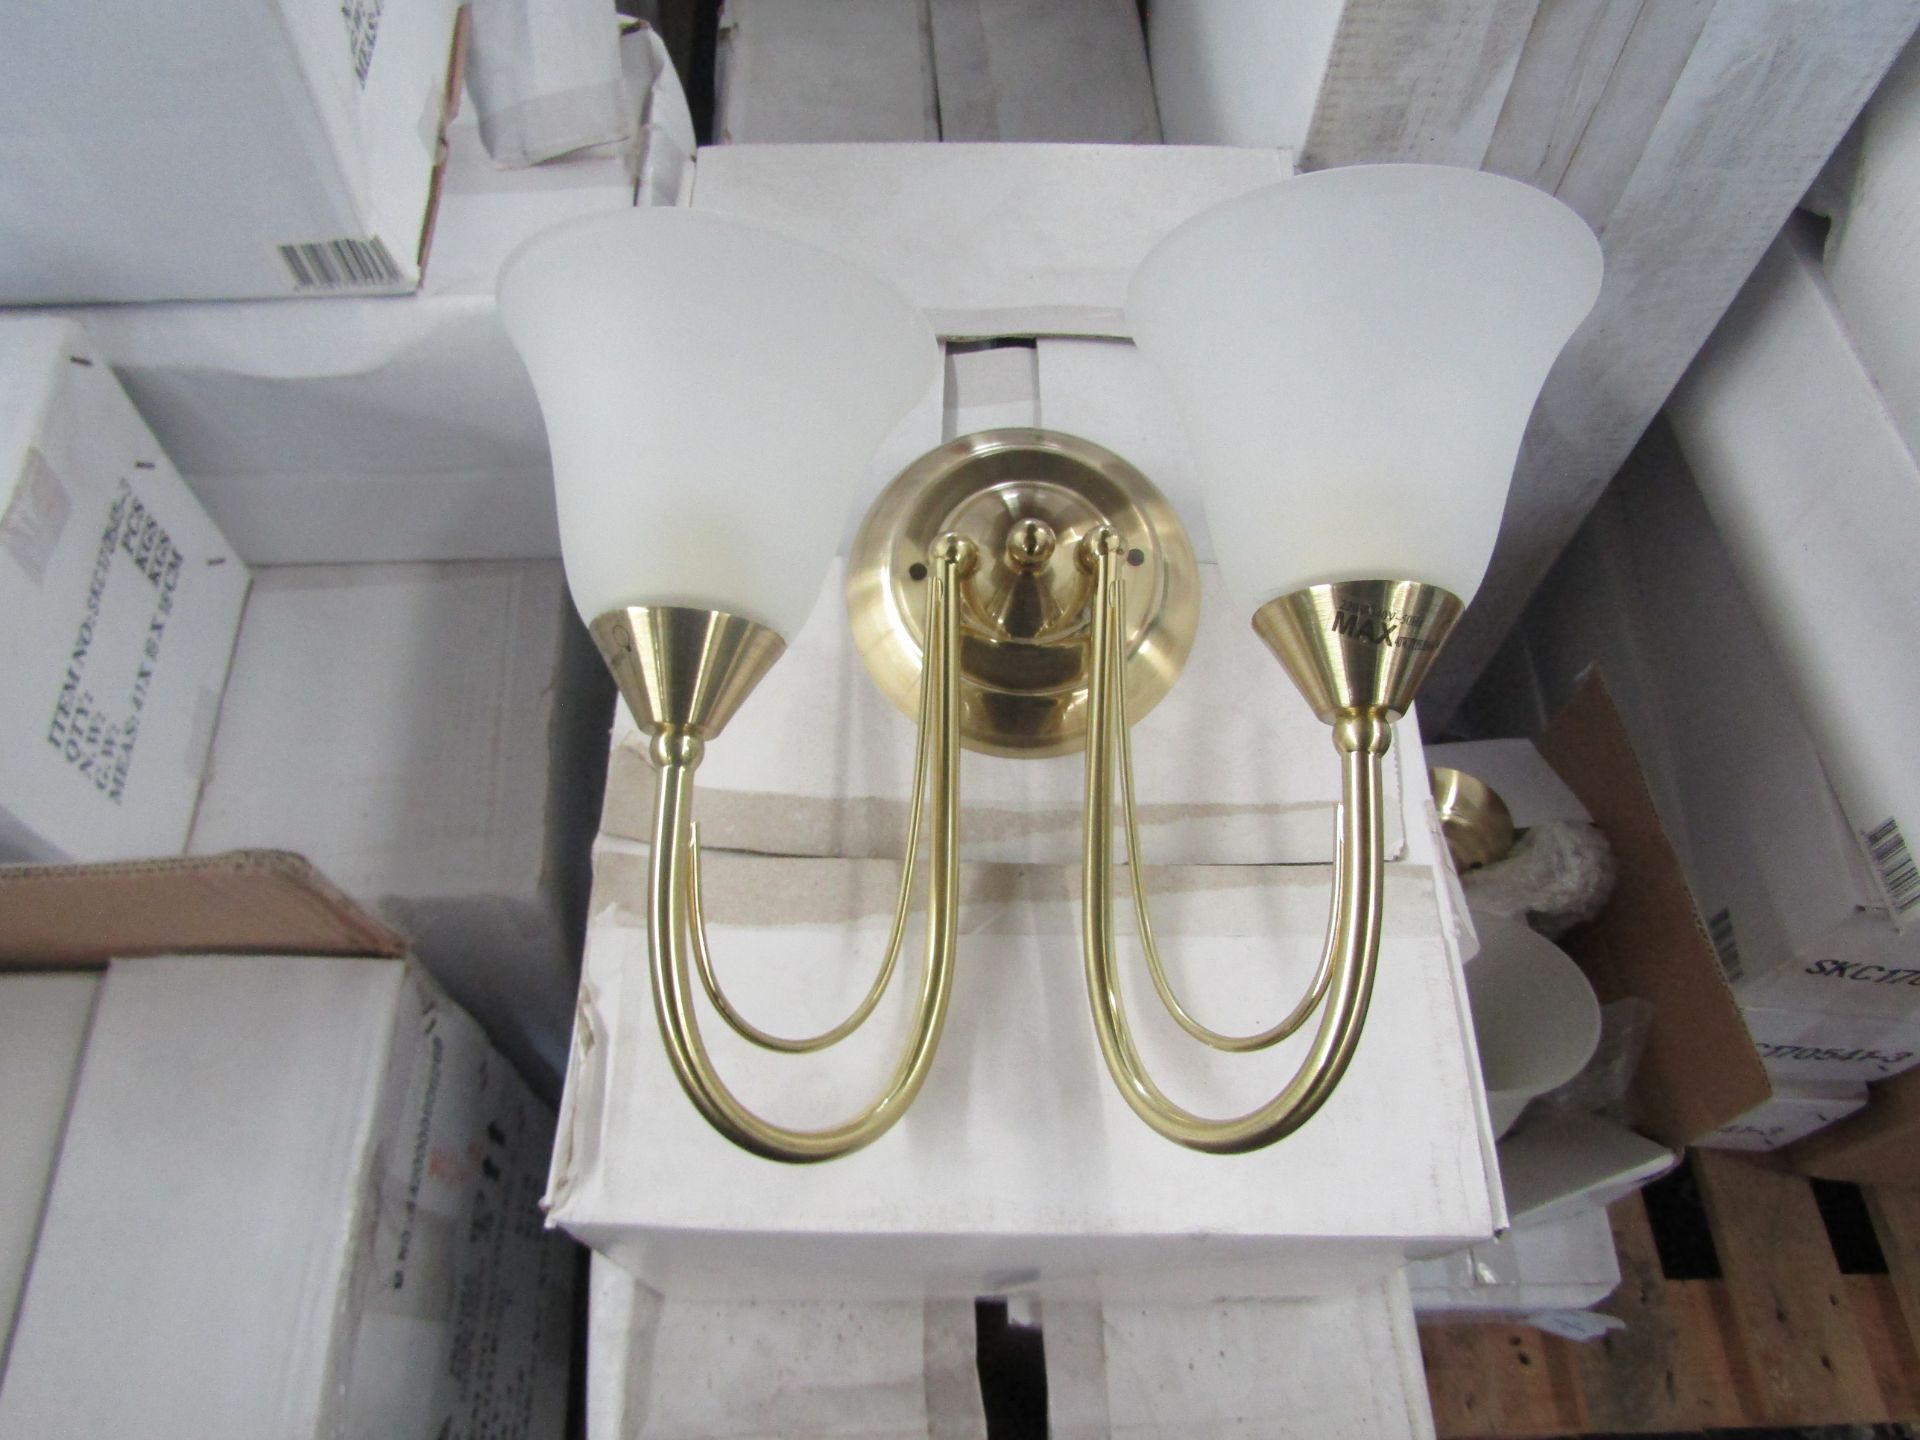 Brass 2 Arm Wall Light fitting with frosted glass shades. H20cm x W30cm. New & Boxed (box maybe shop